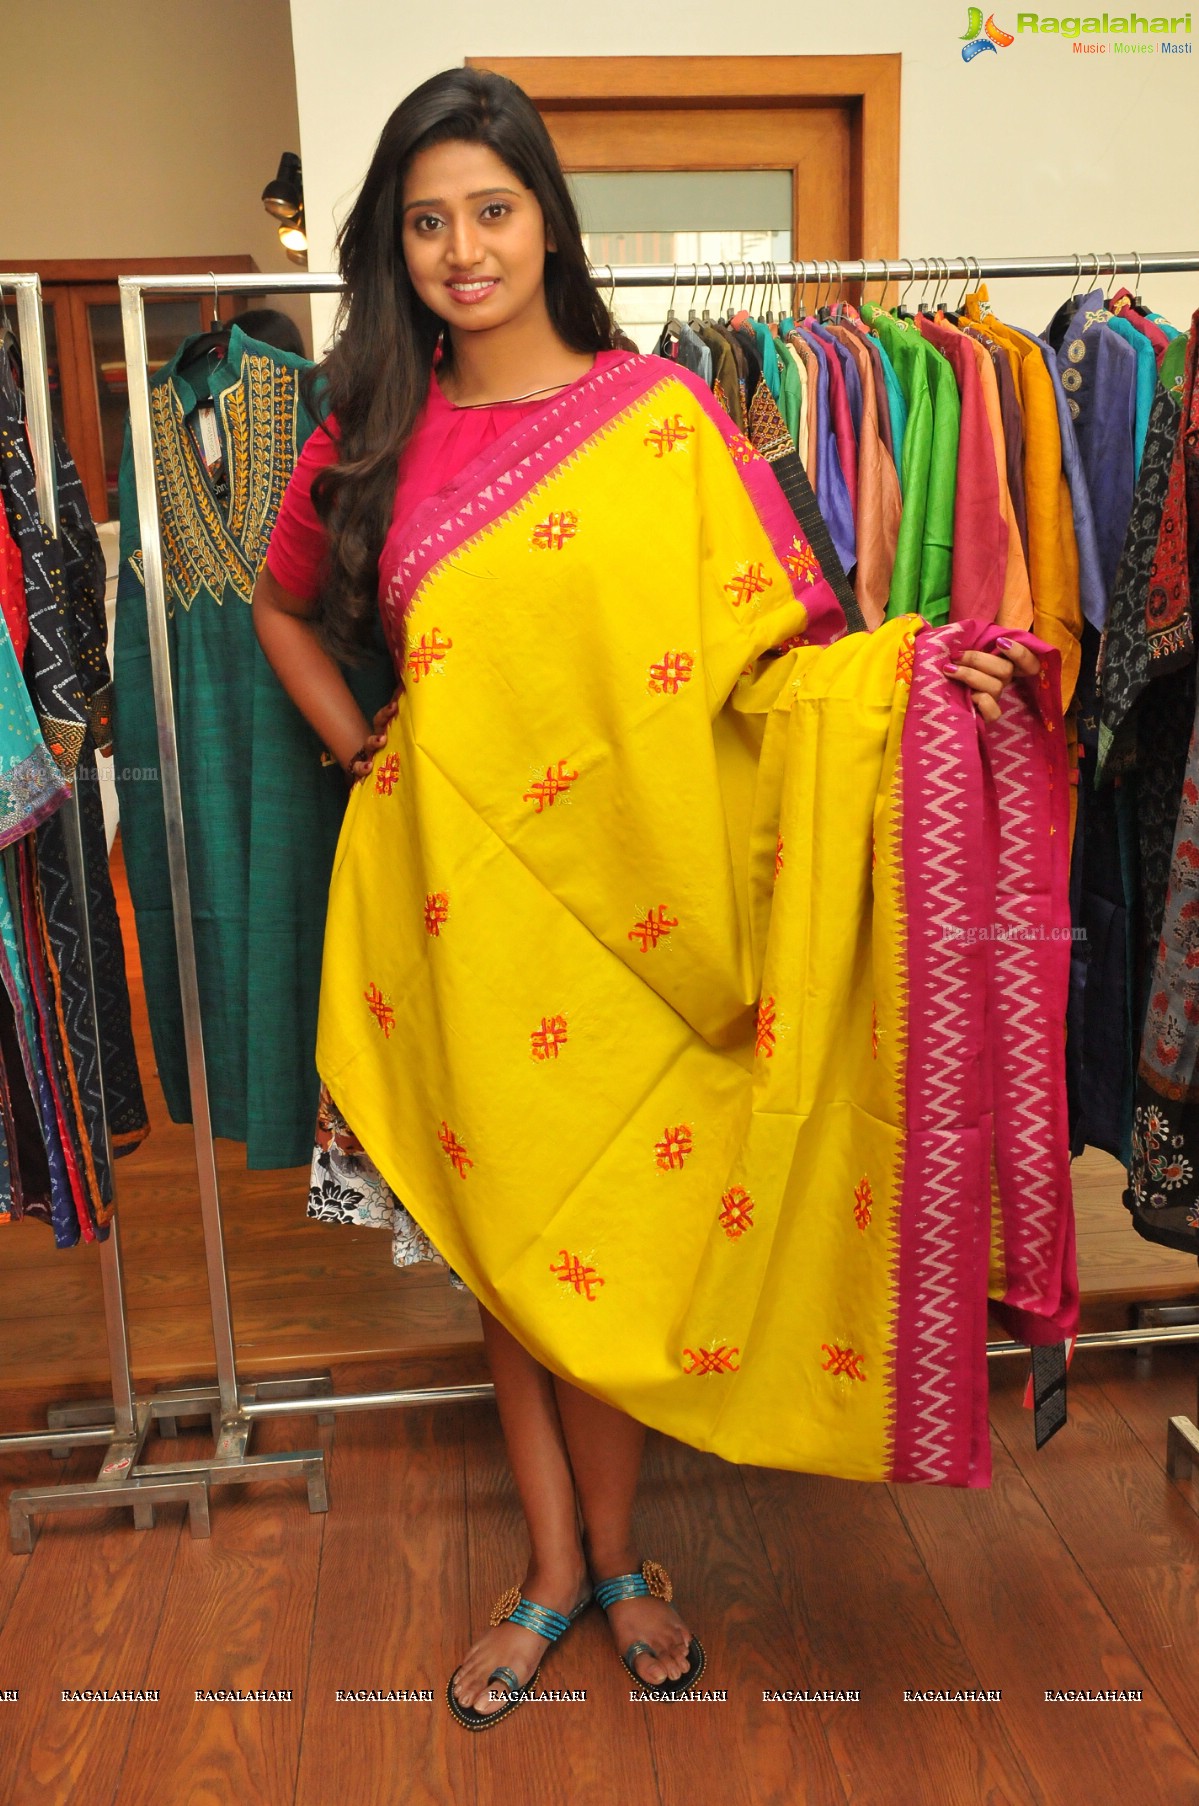 Shalini launches Shrujan Hand Embroidery Exclusive Expo